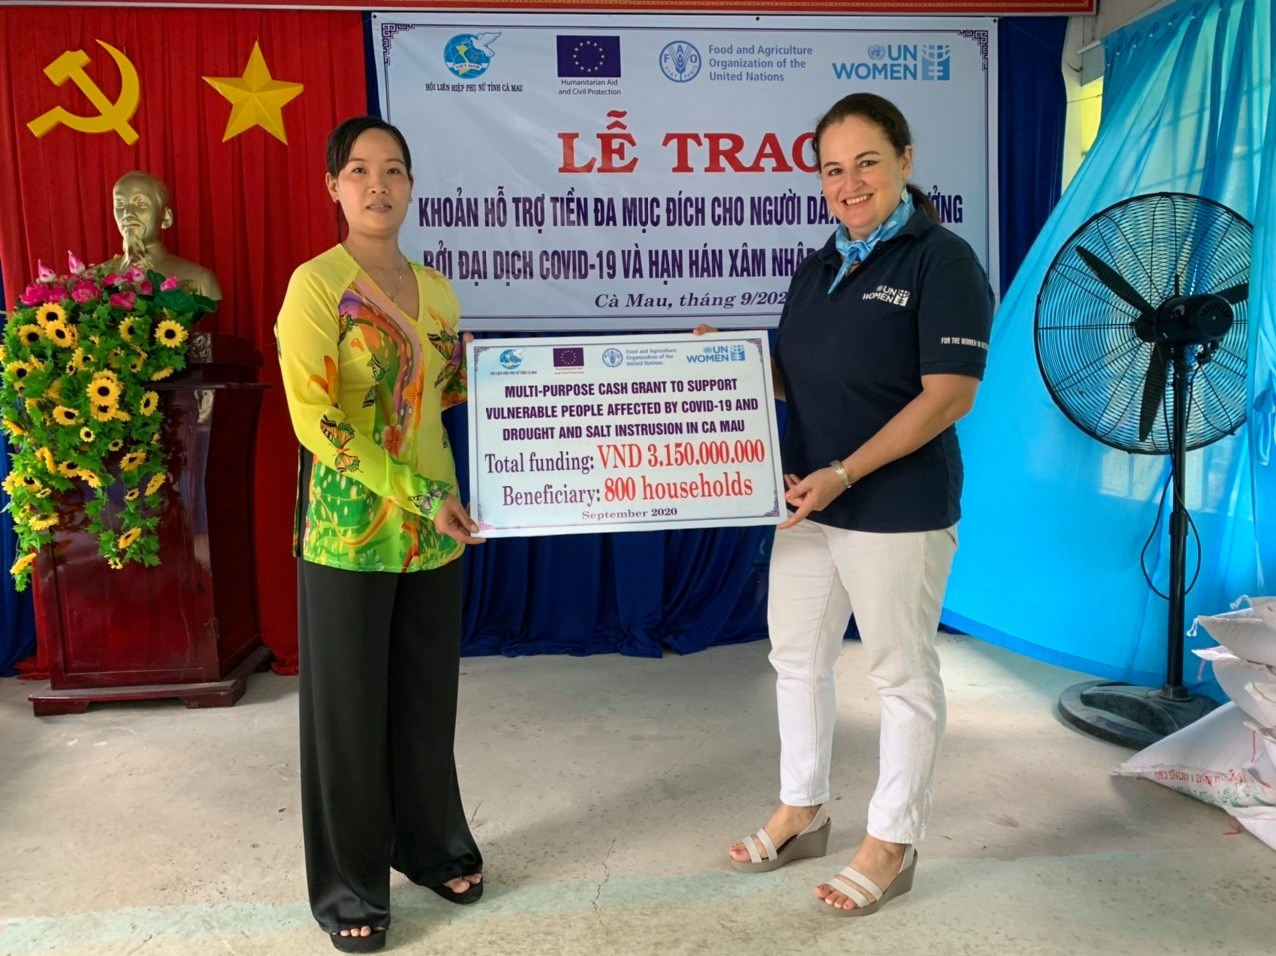 US$ 133,000 to help 3,500 vulnerable people stricken by COVID-19 and drought in Vietnam